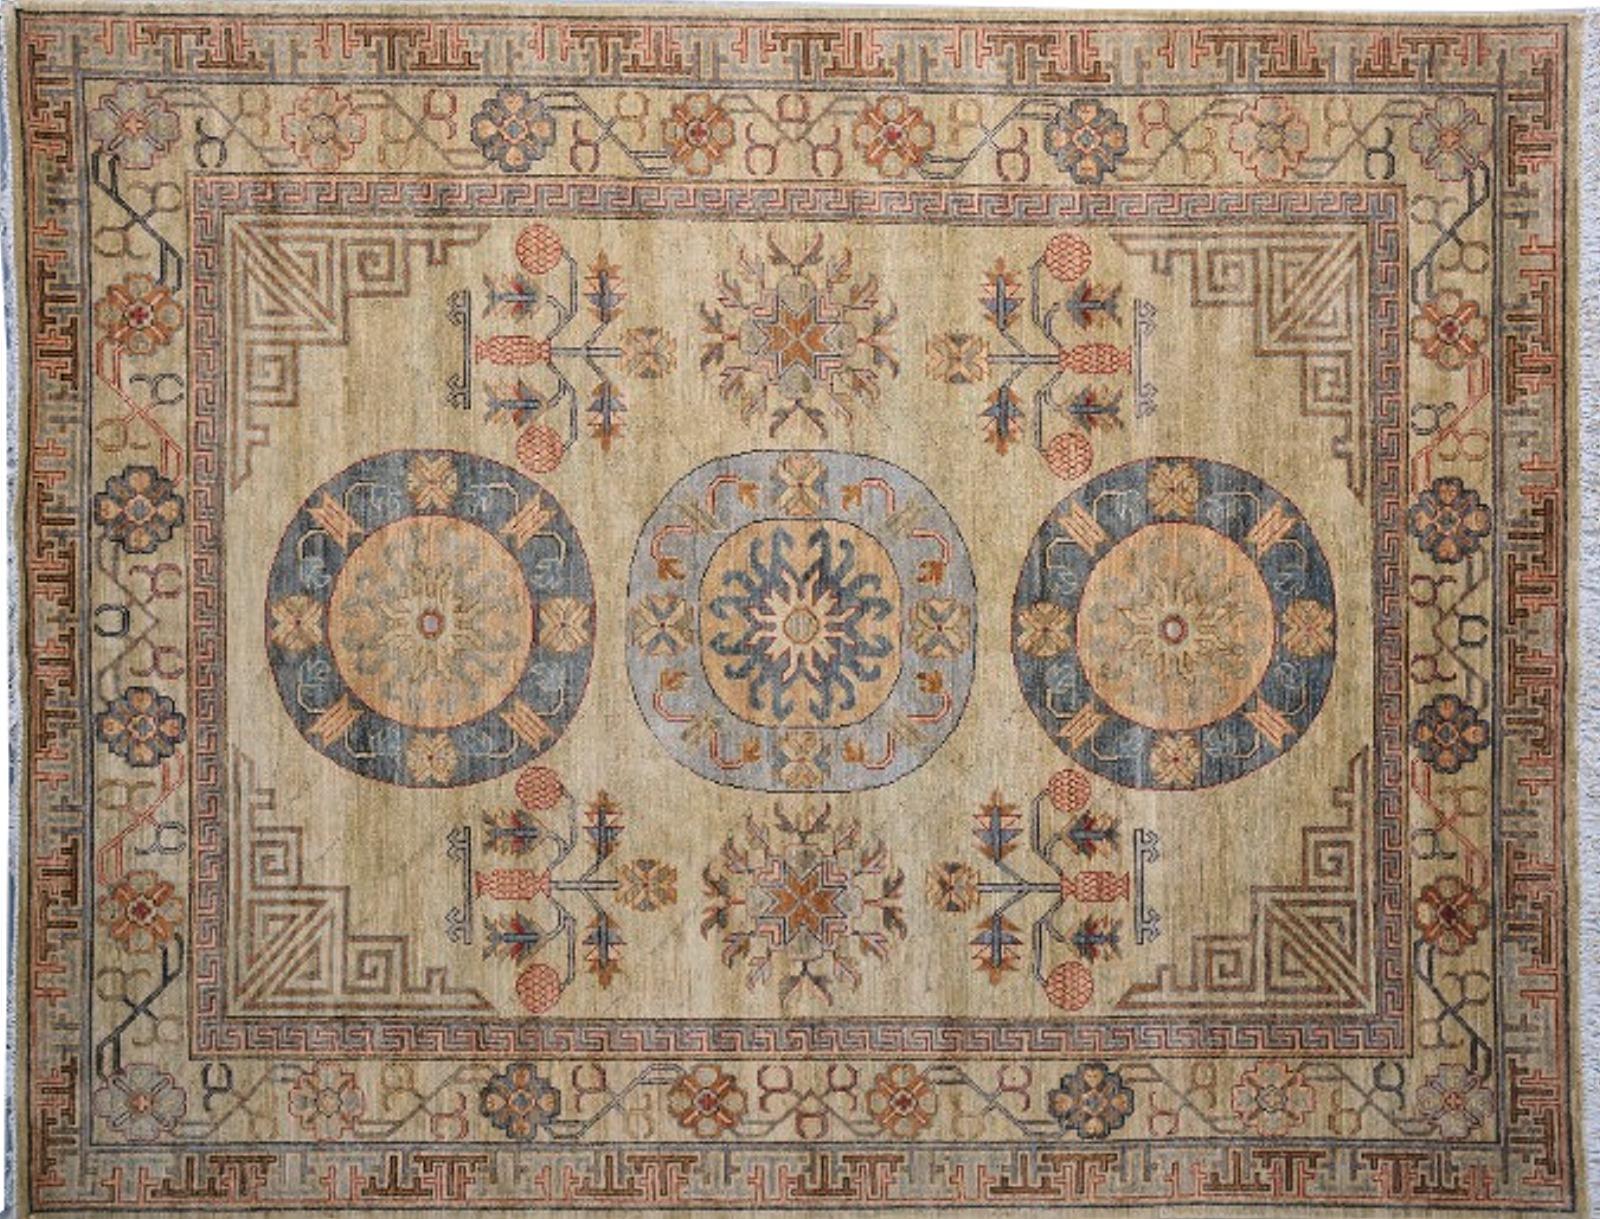 Wool 7 x 9 ft Samarkand Khotan Rug Hand Knotted Contemporary beige brown blue